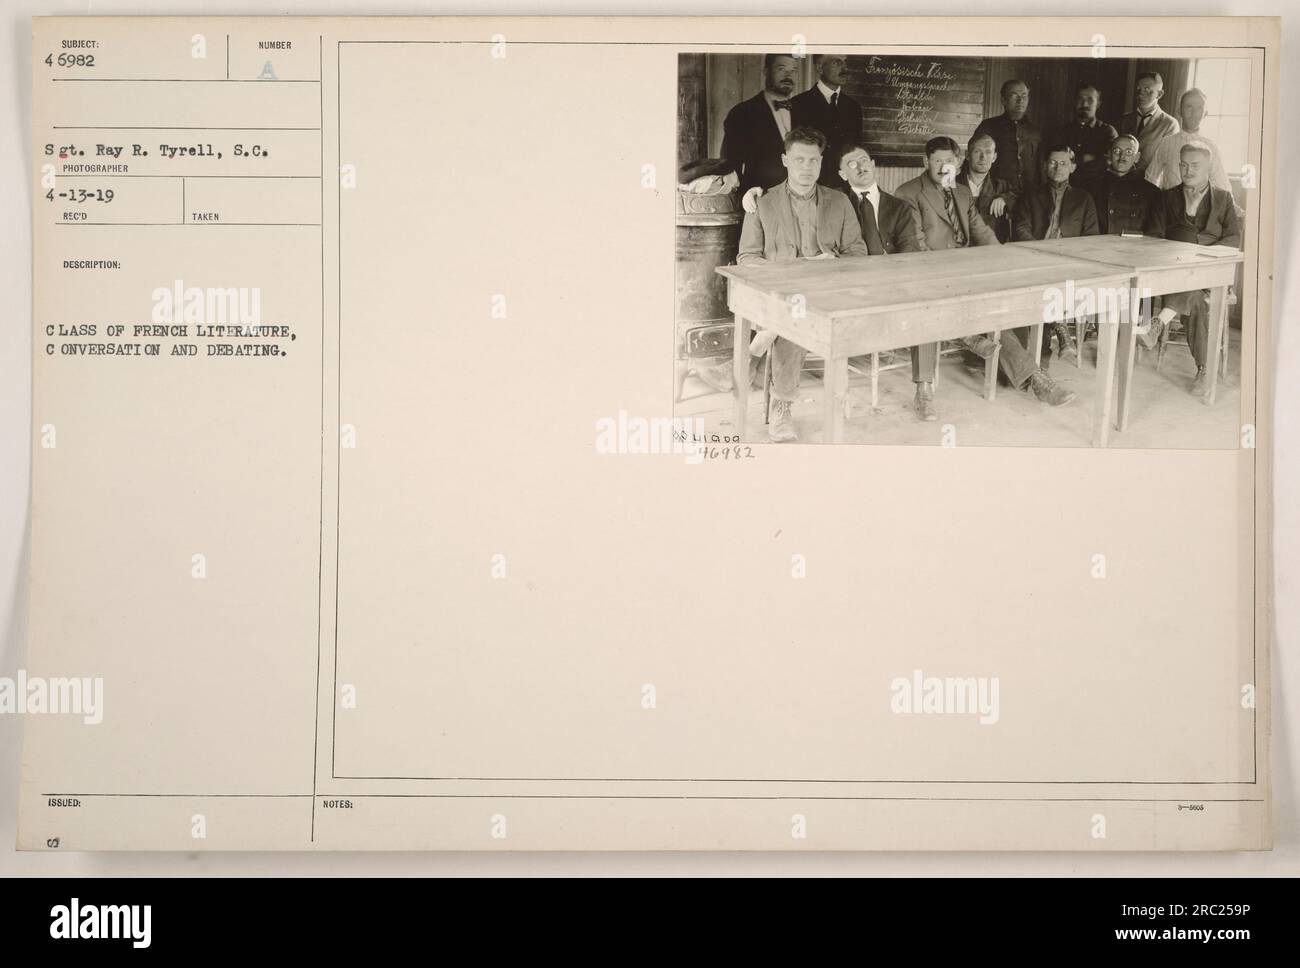 'Class of French literature engages in conversation and debating. Photograph taken by Sgt. Ray R. Tyrell, S.C. on April 13, 1919. Reference number: 6982. Notes: 41000, 46982, Smisisch there Alle Jokine.' Stock Photo